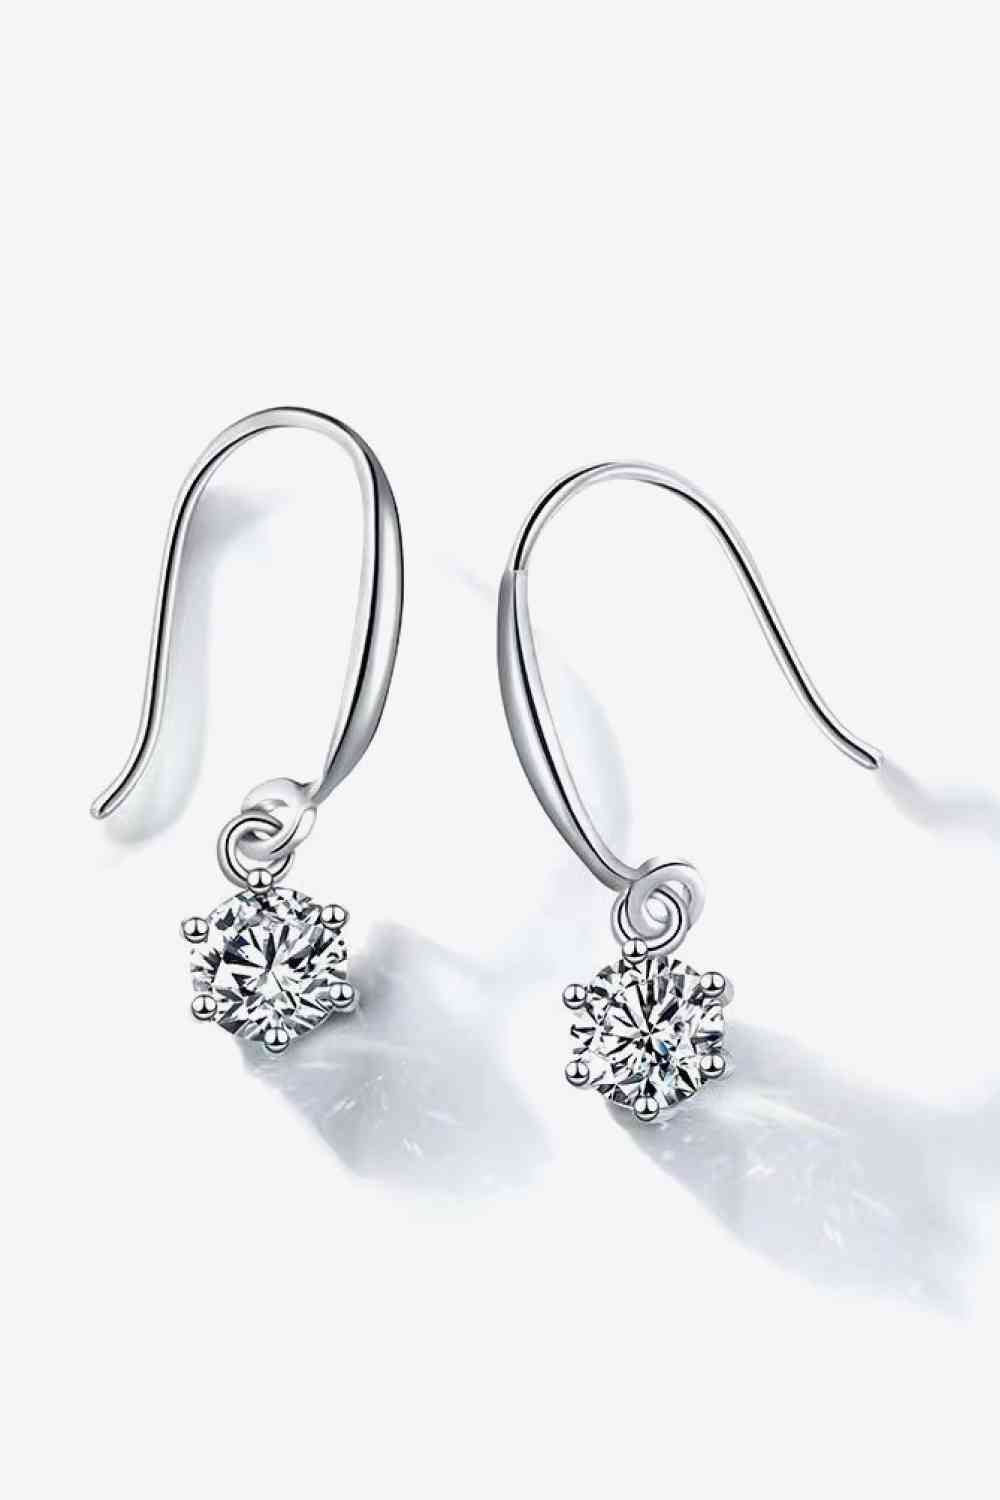 a pair of diamond earrings on a white background